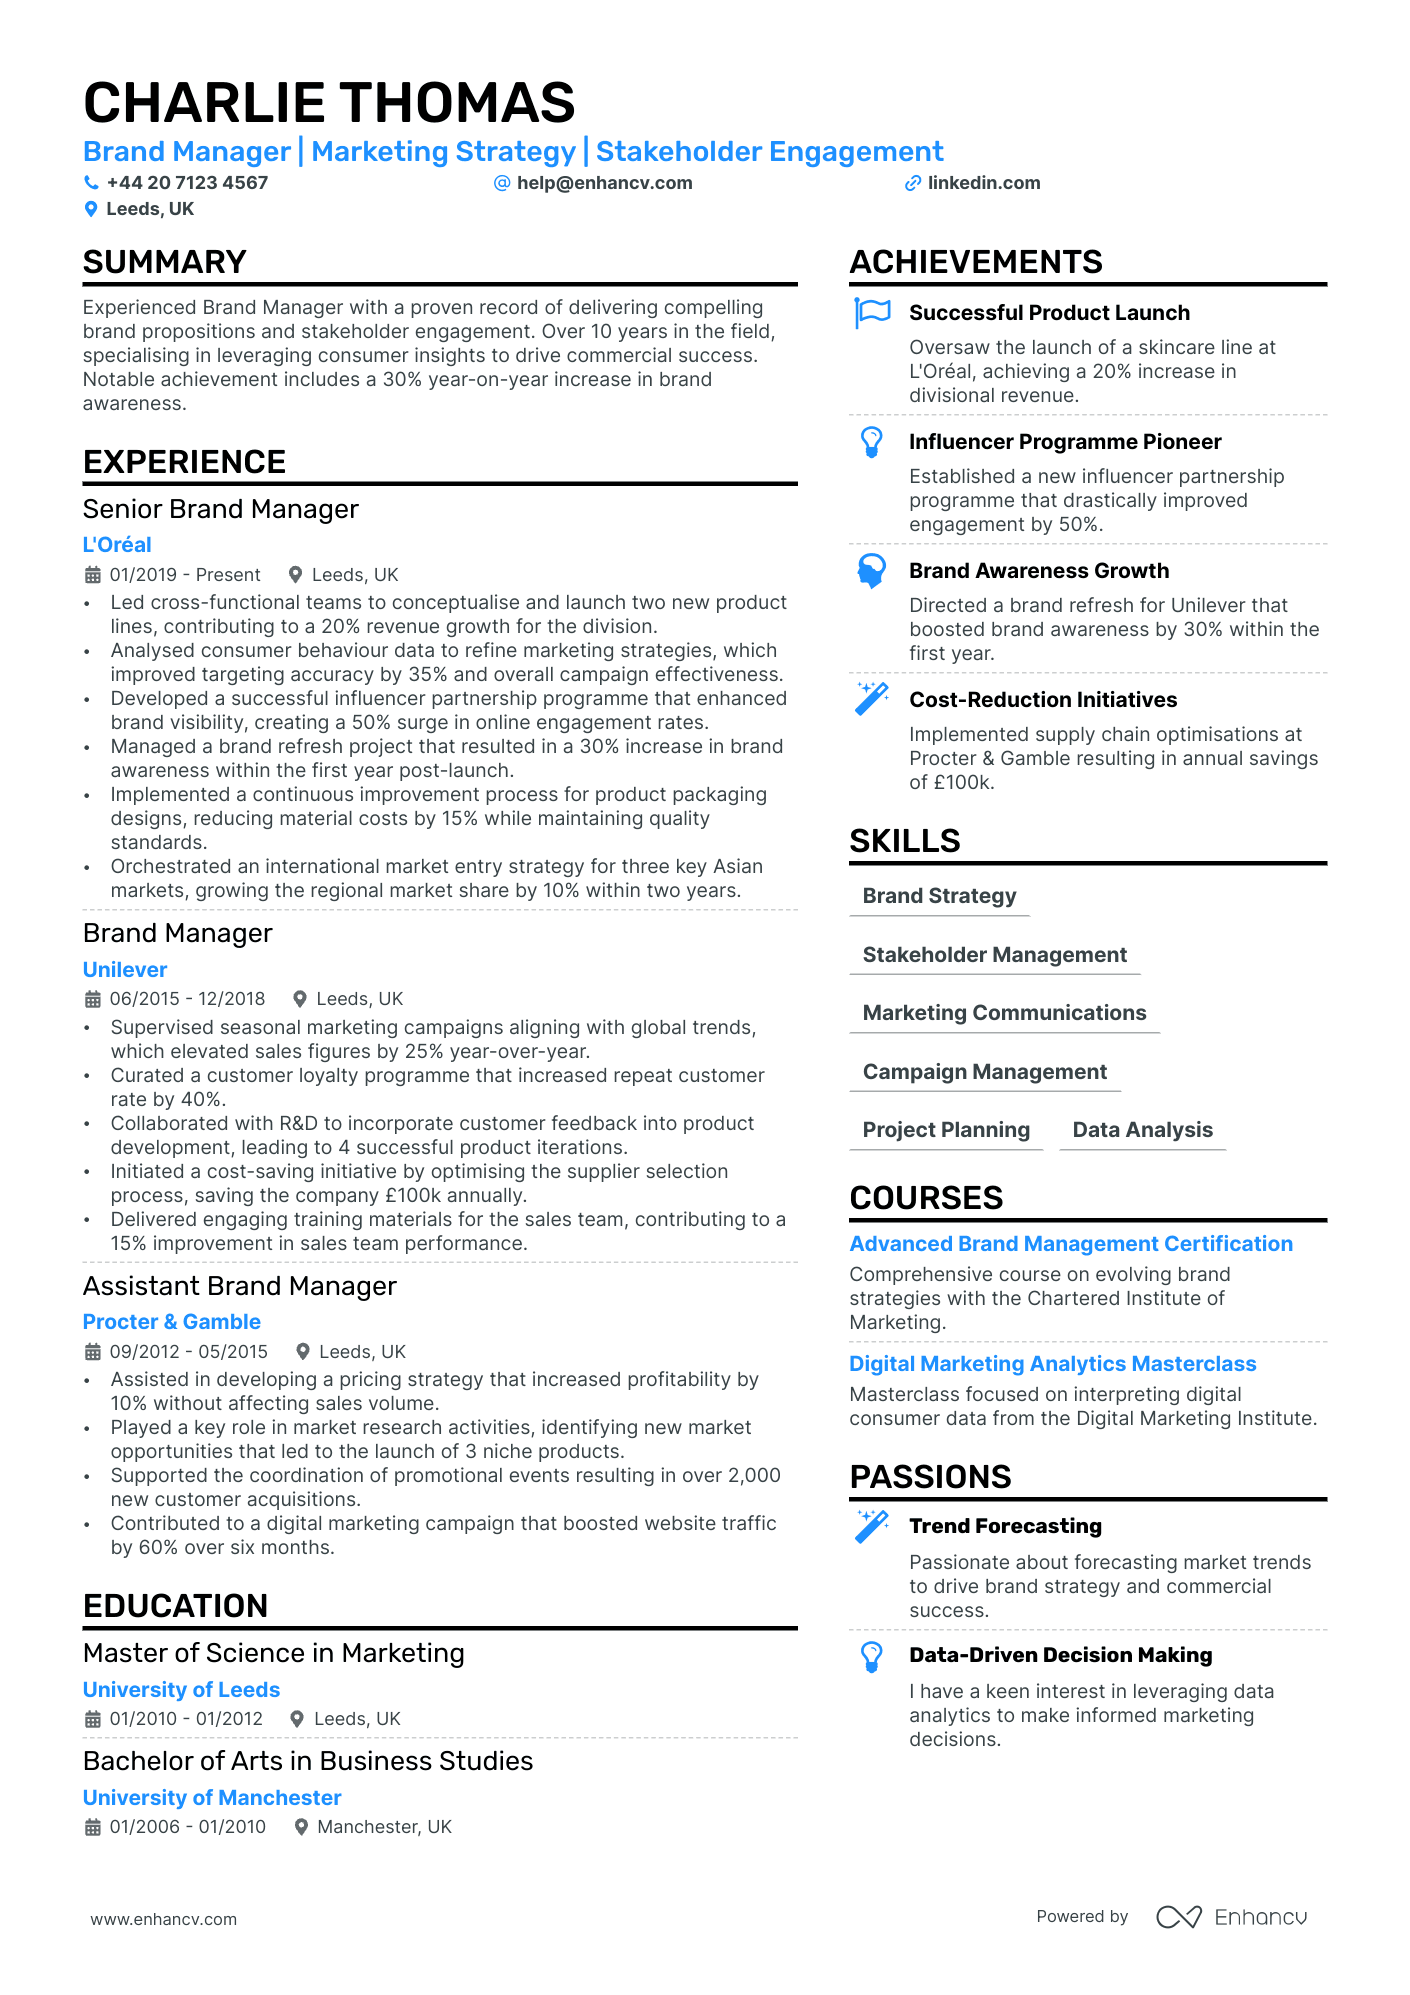 Brand Manager cv example